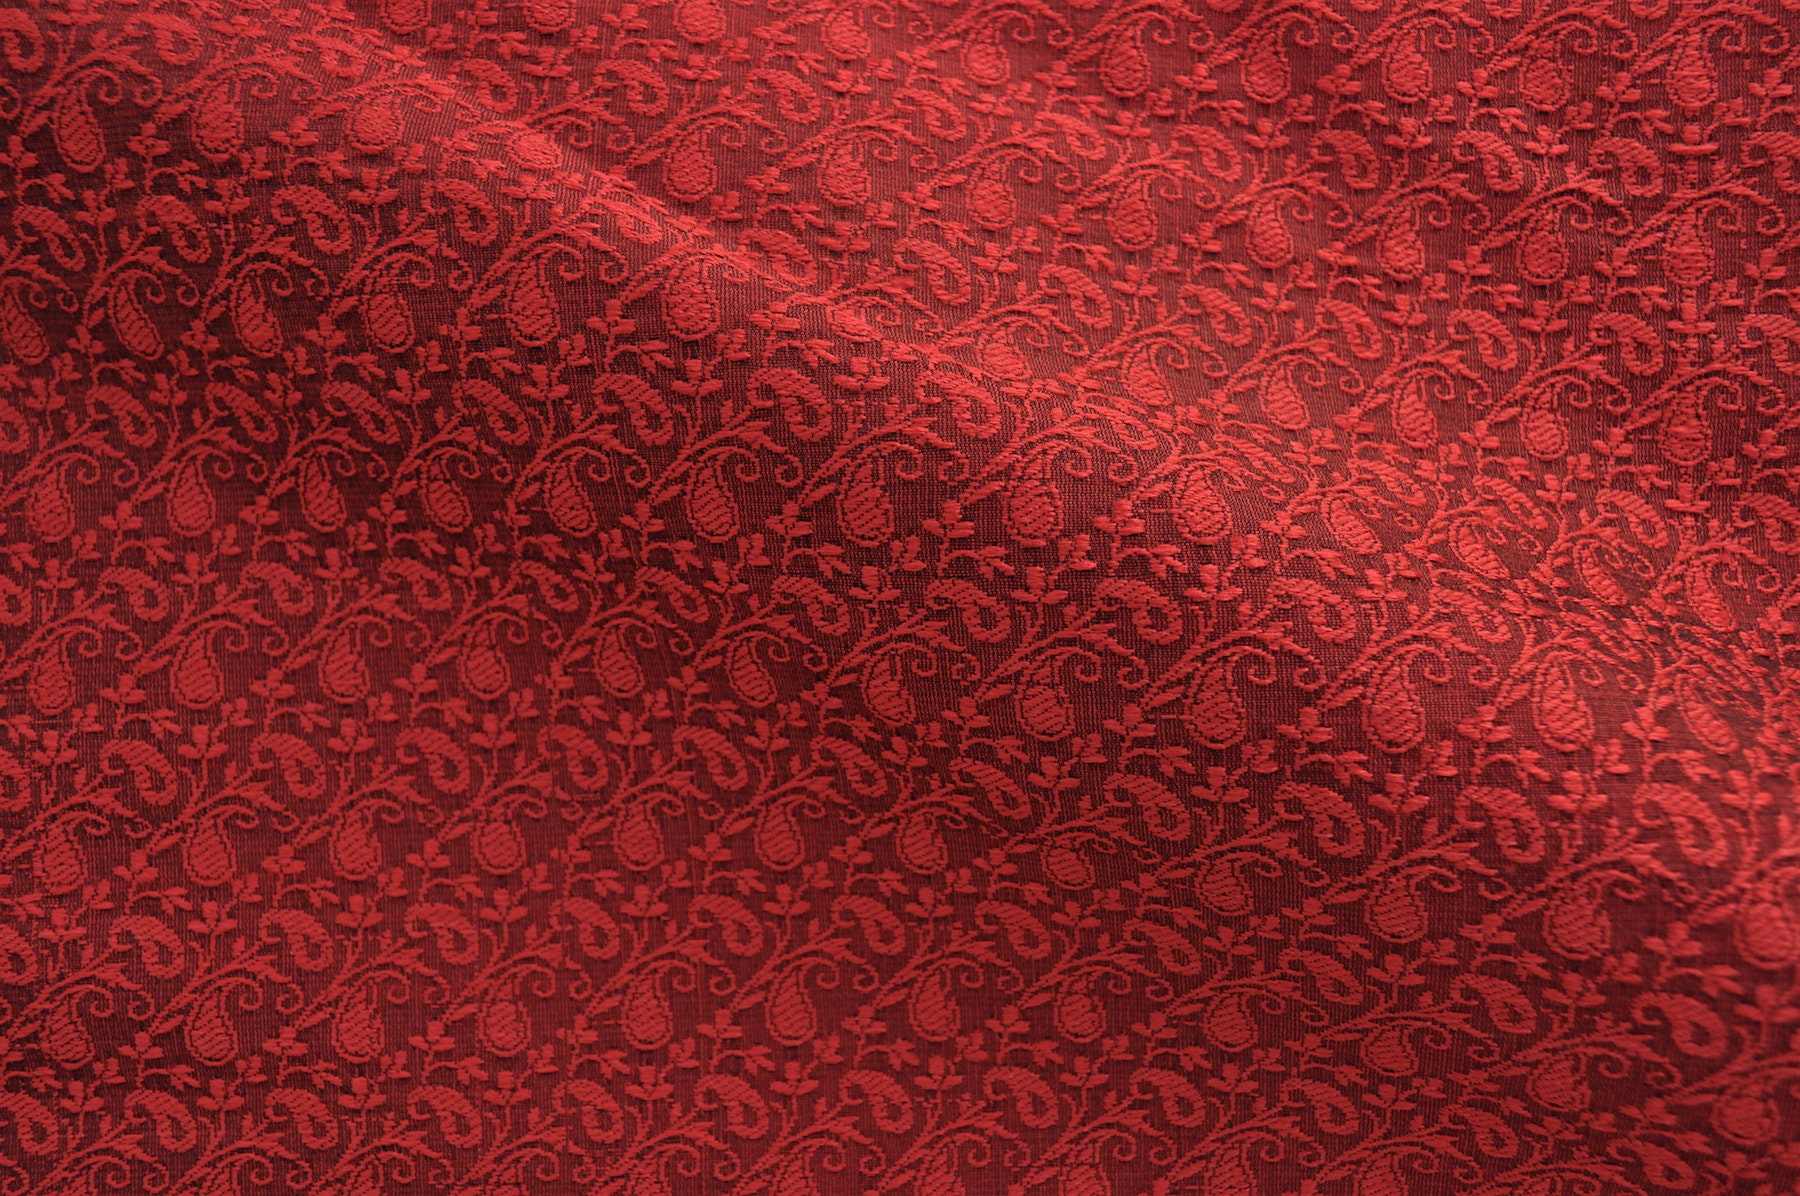 Free Shipping Beautiful Deep red cotton jacquard fabric by the | Etsy